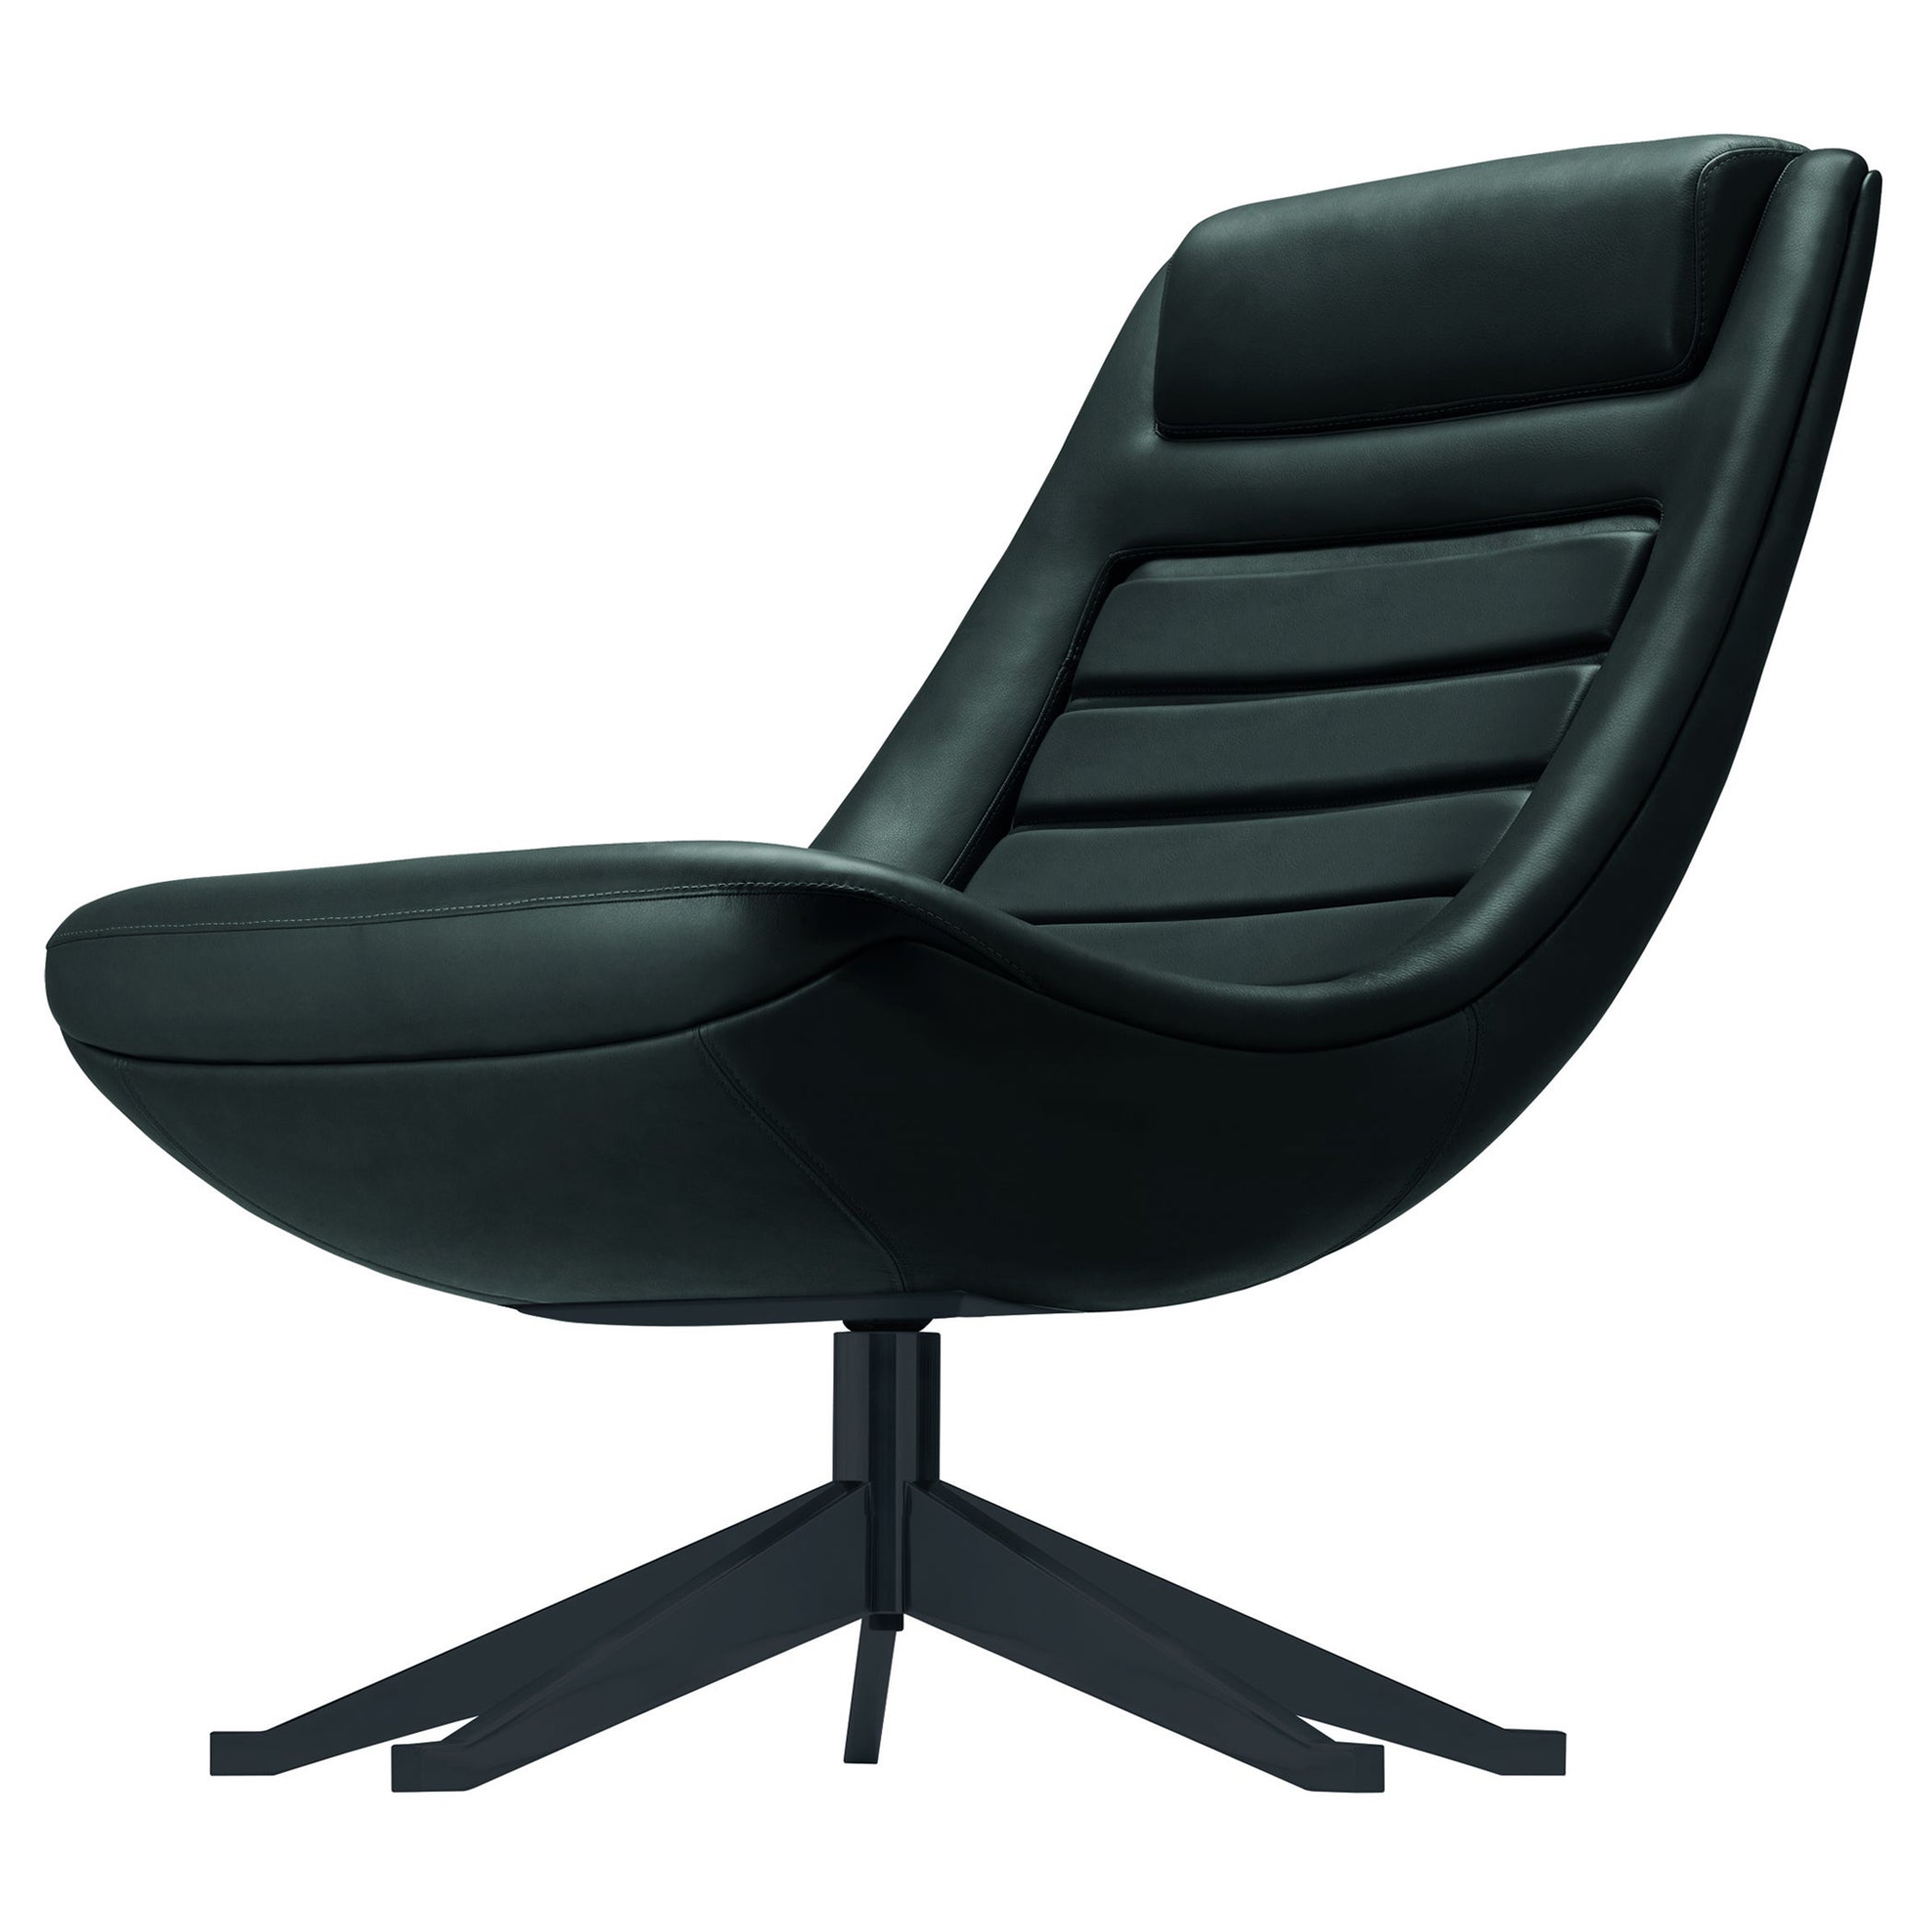 Alias 090 Manzù Lounge Chair in Black Leather Seat with Lacquered Aluminum Frame